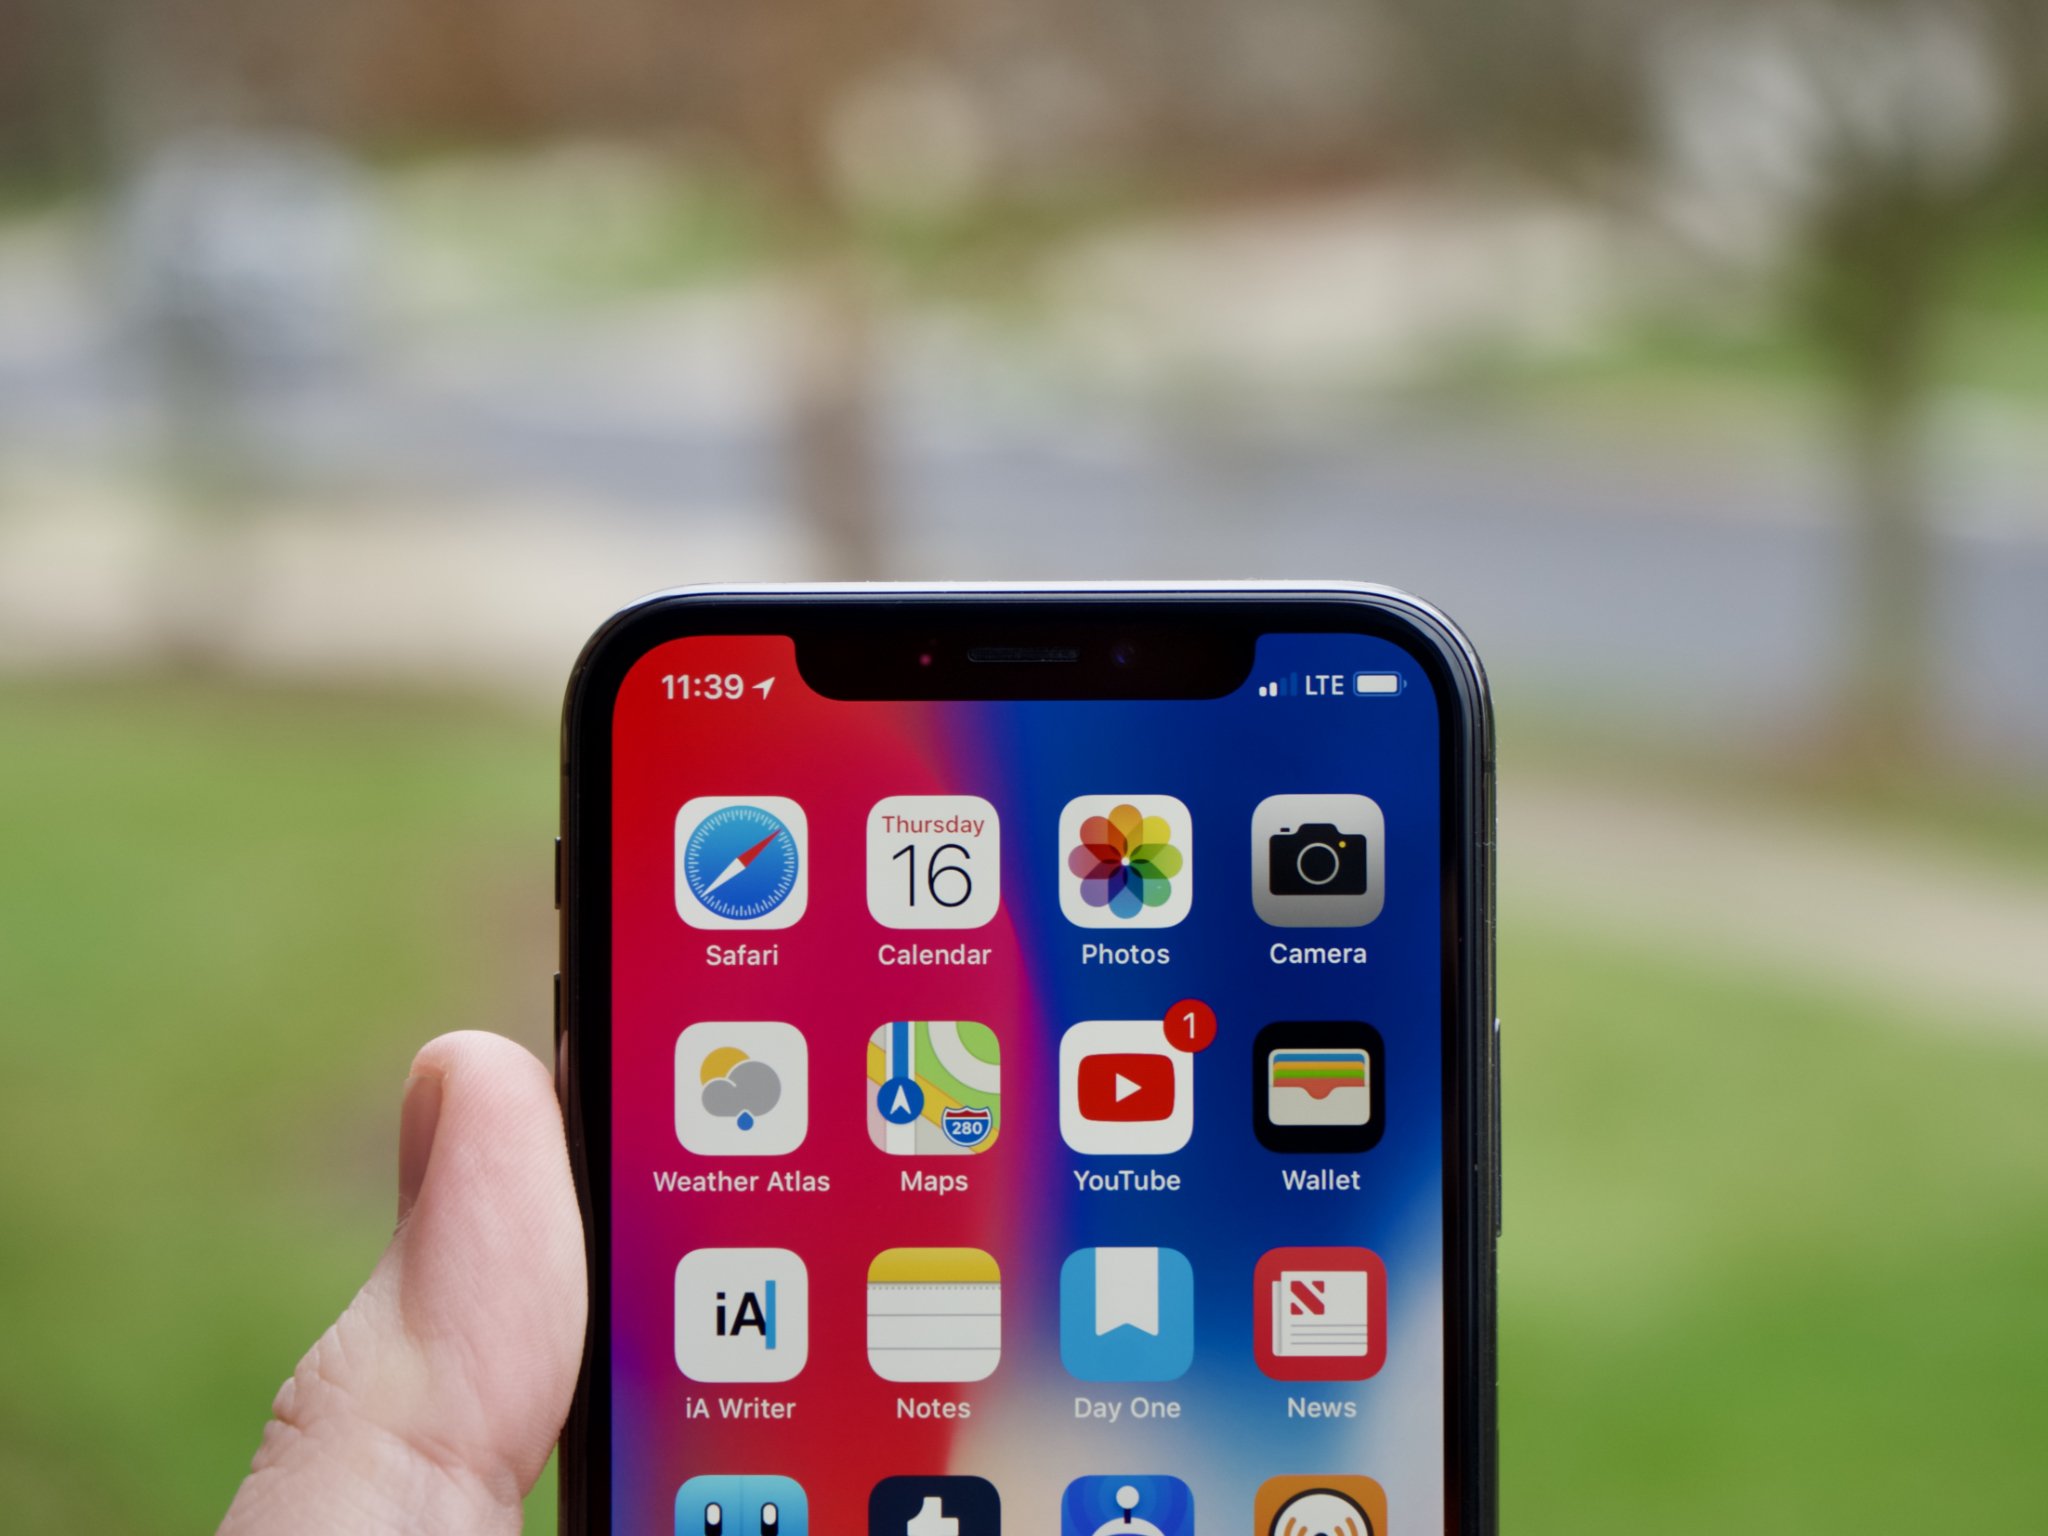 How to use Face ID on iPhone X